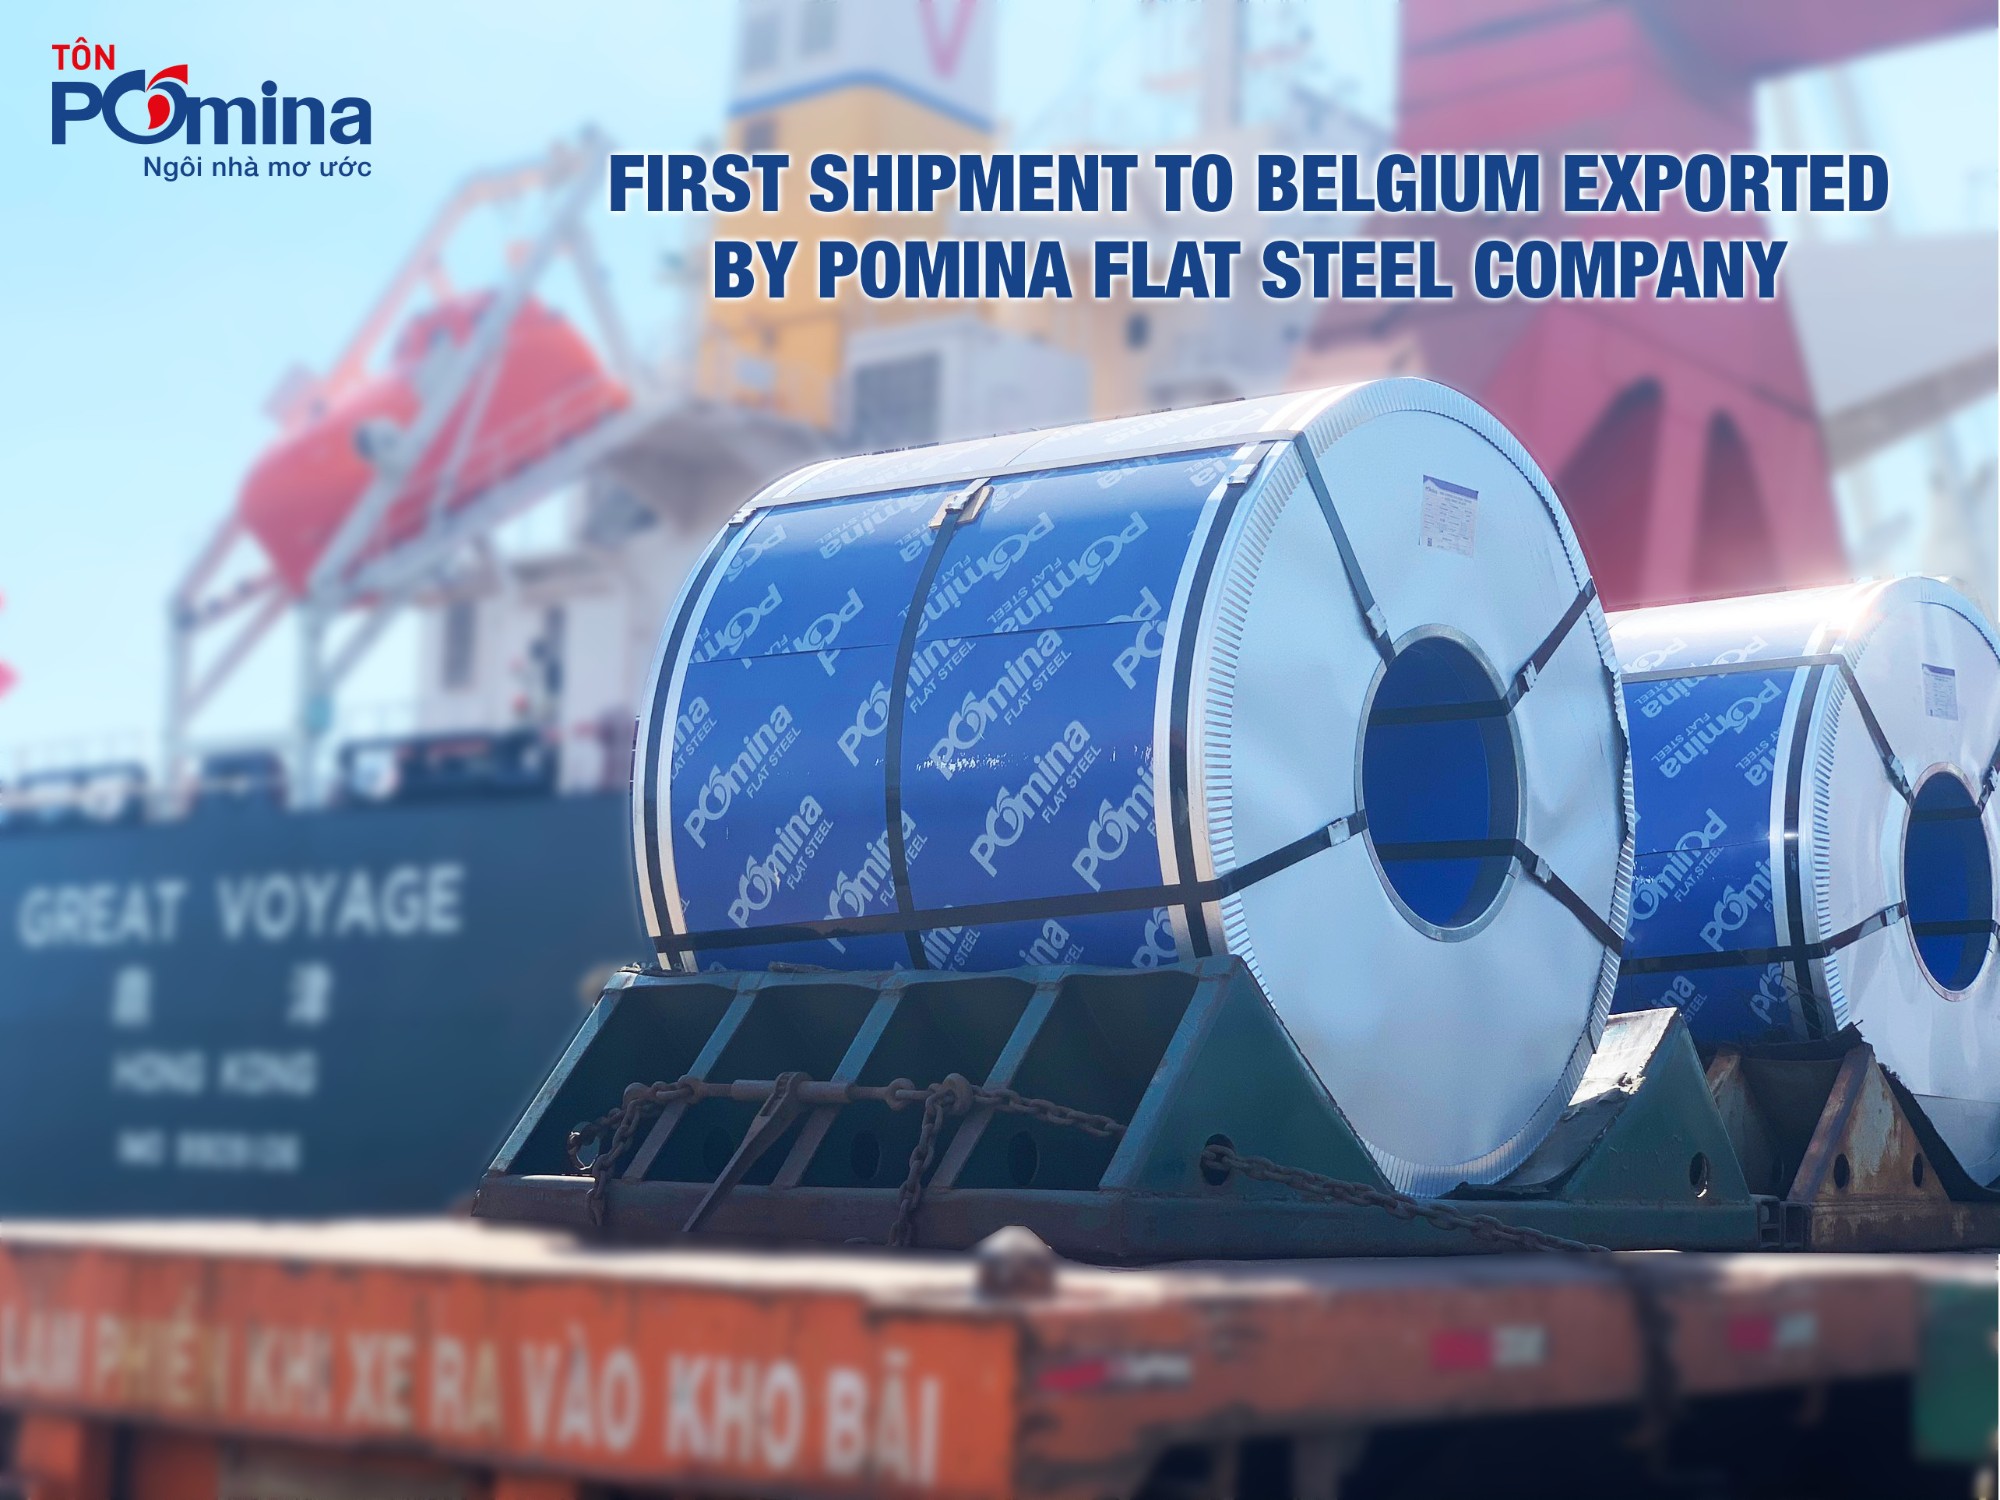 FIRST SHIPMENT TO BELGIUM EXPORTED BY POMINA FLAT STEEL COMPANY